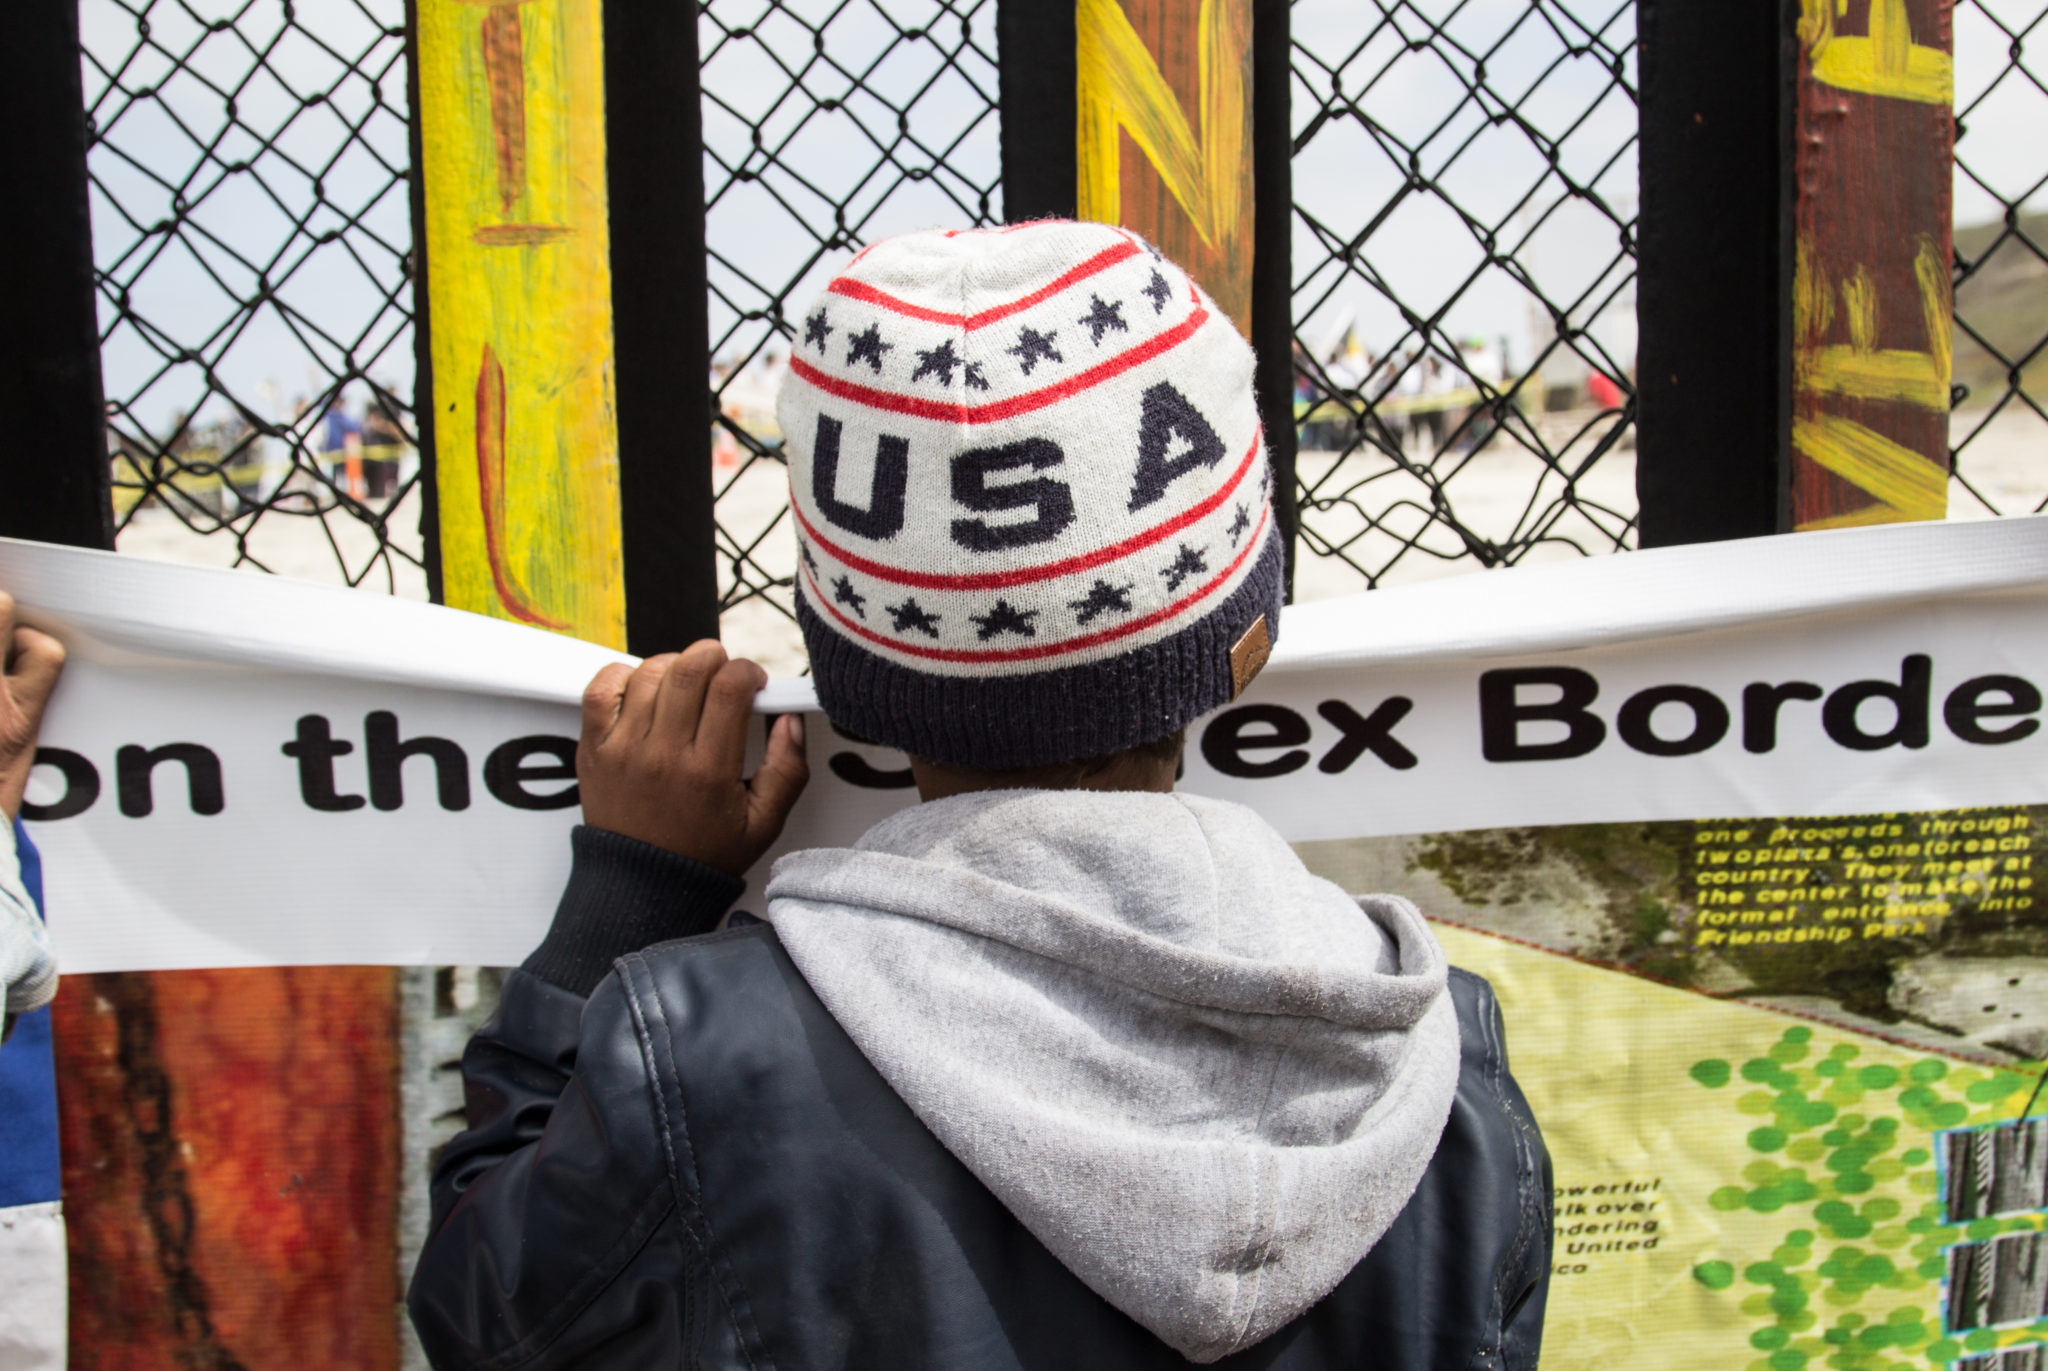 Americas: US government endangers asylum seekers with unlawful policies